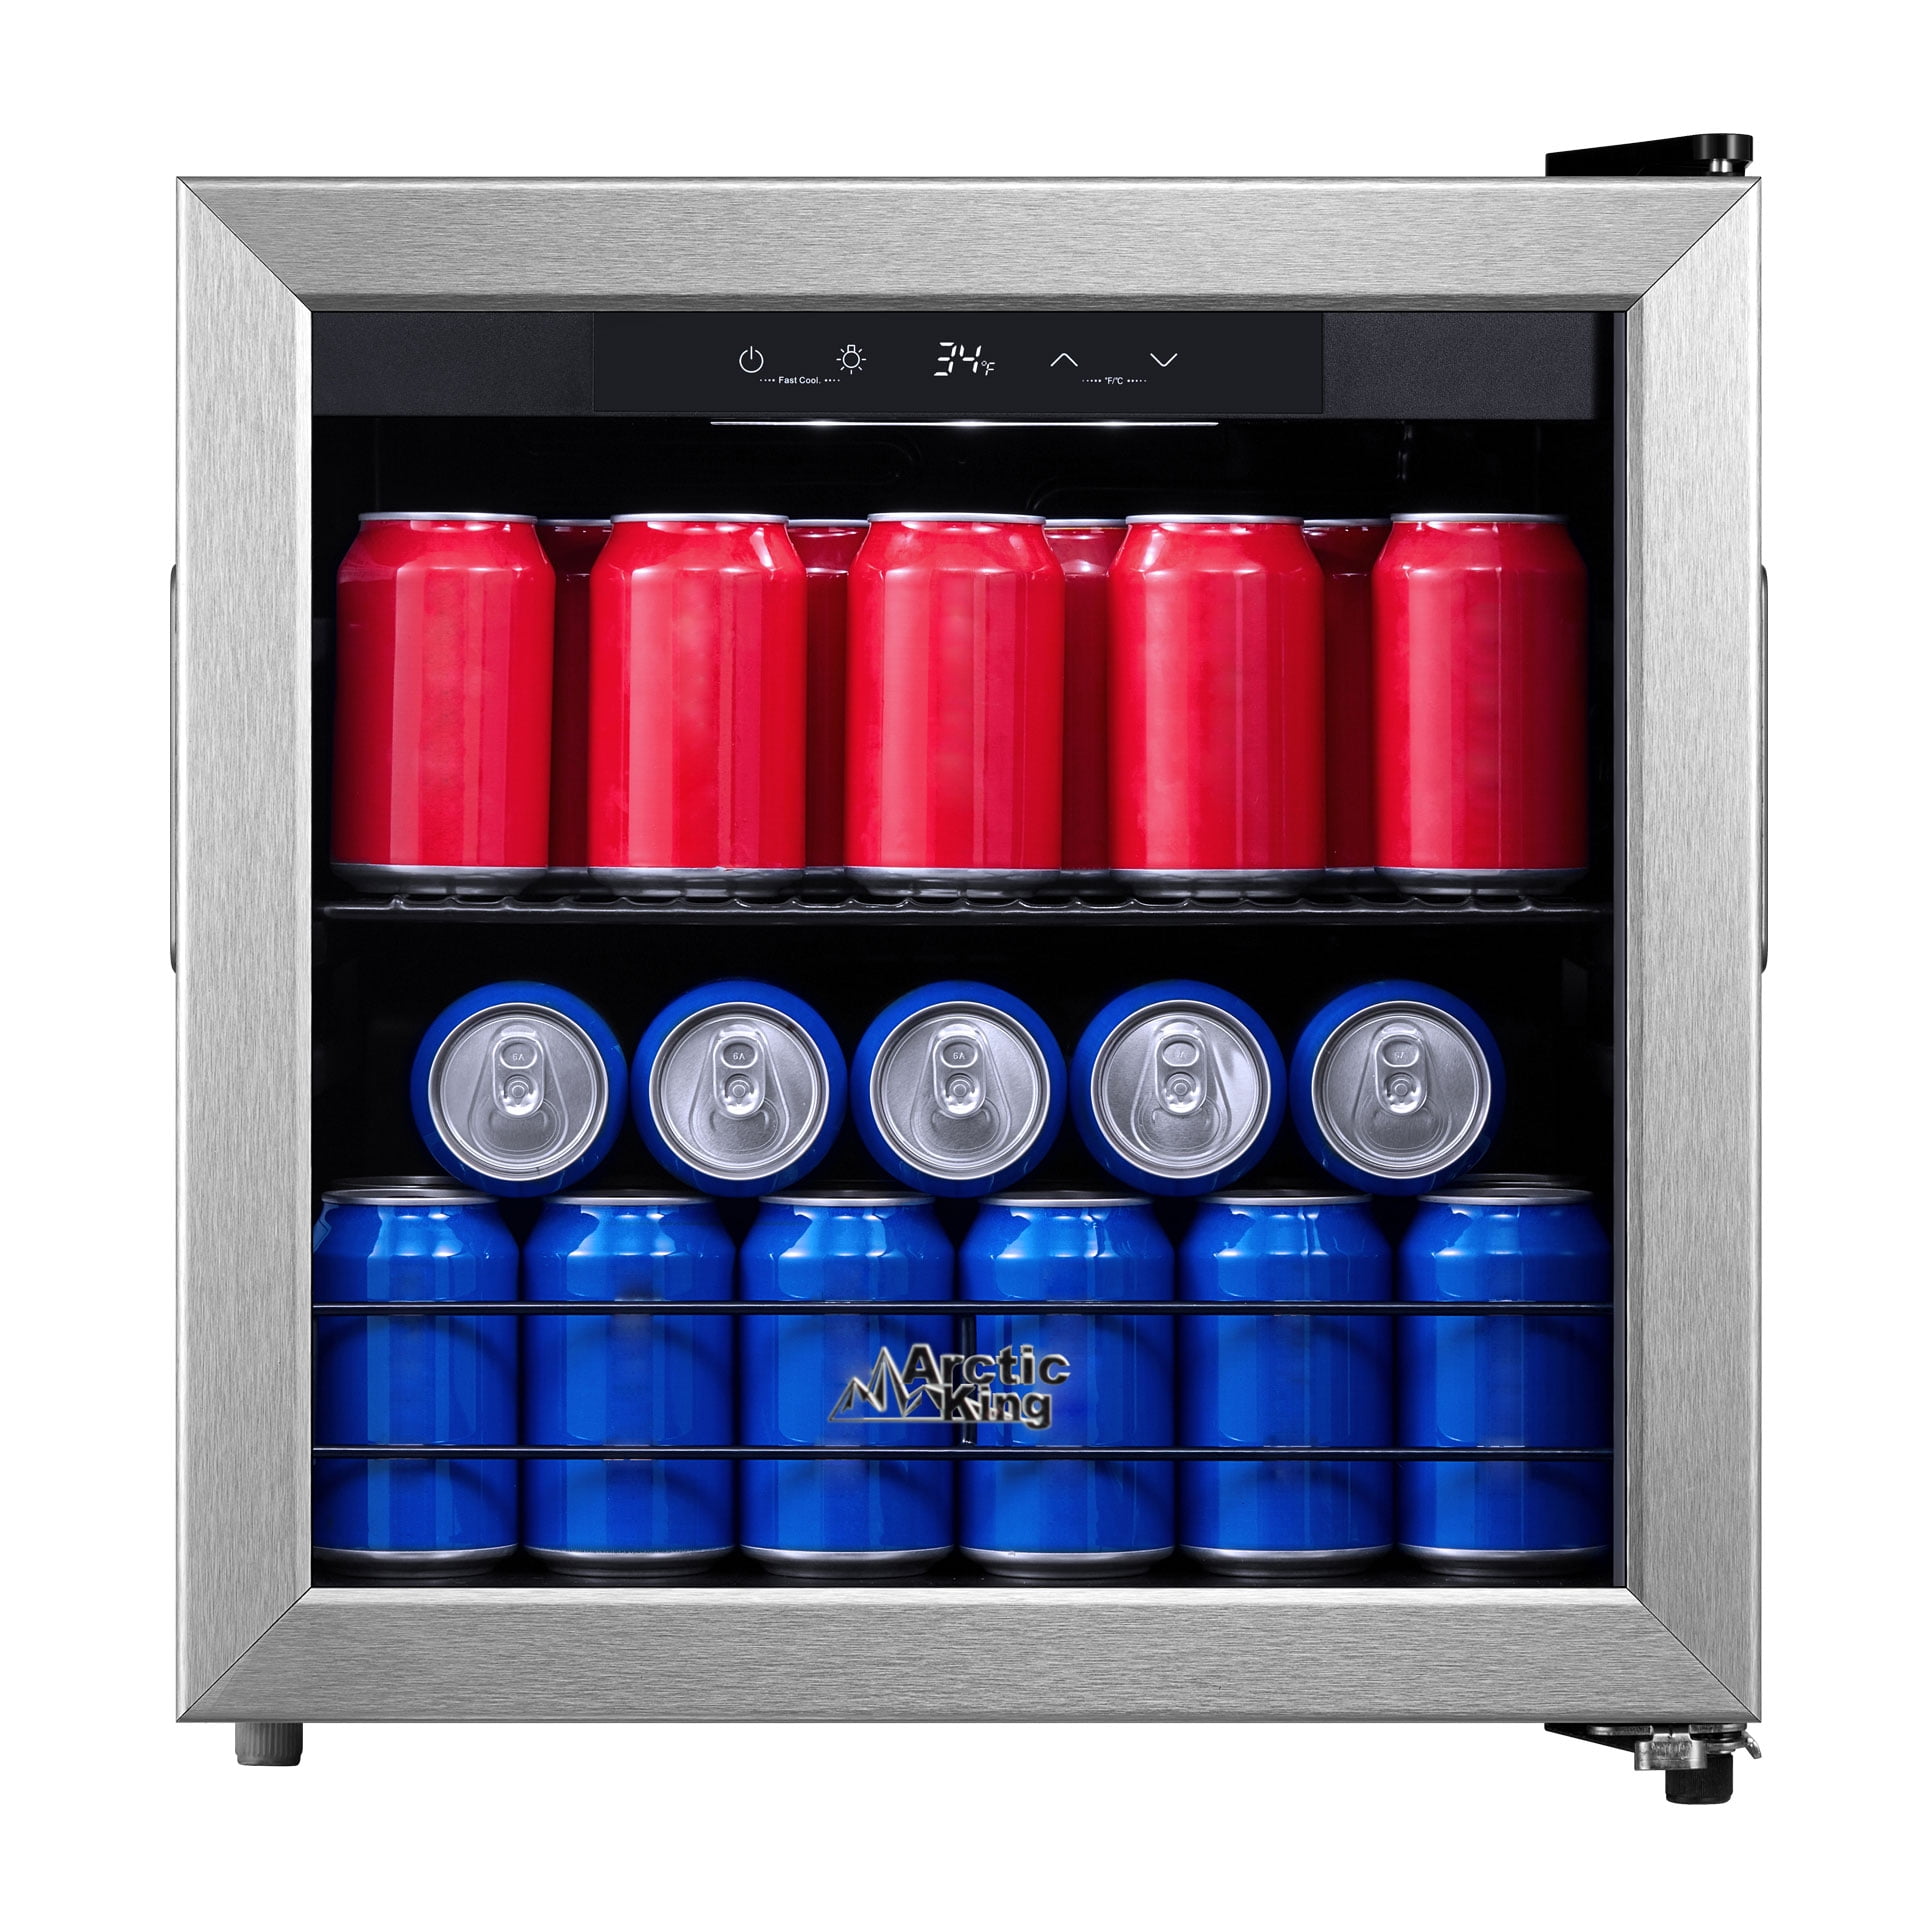 Arctic King 48-Can Beverage Fridge & Cooler with Electrical Control, Stainless Steel Look, ARV48B1AST, $98, free shipping, Walmart